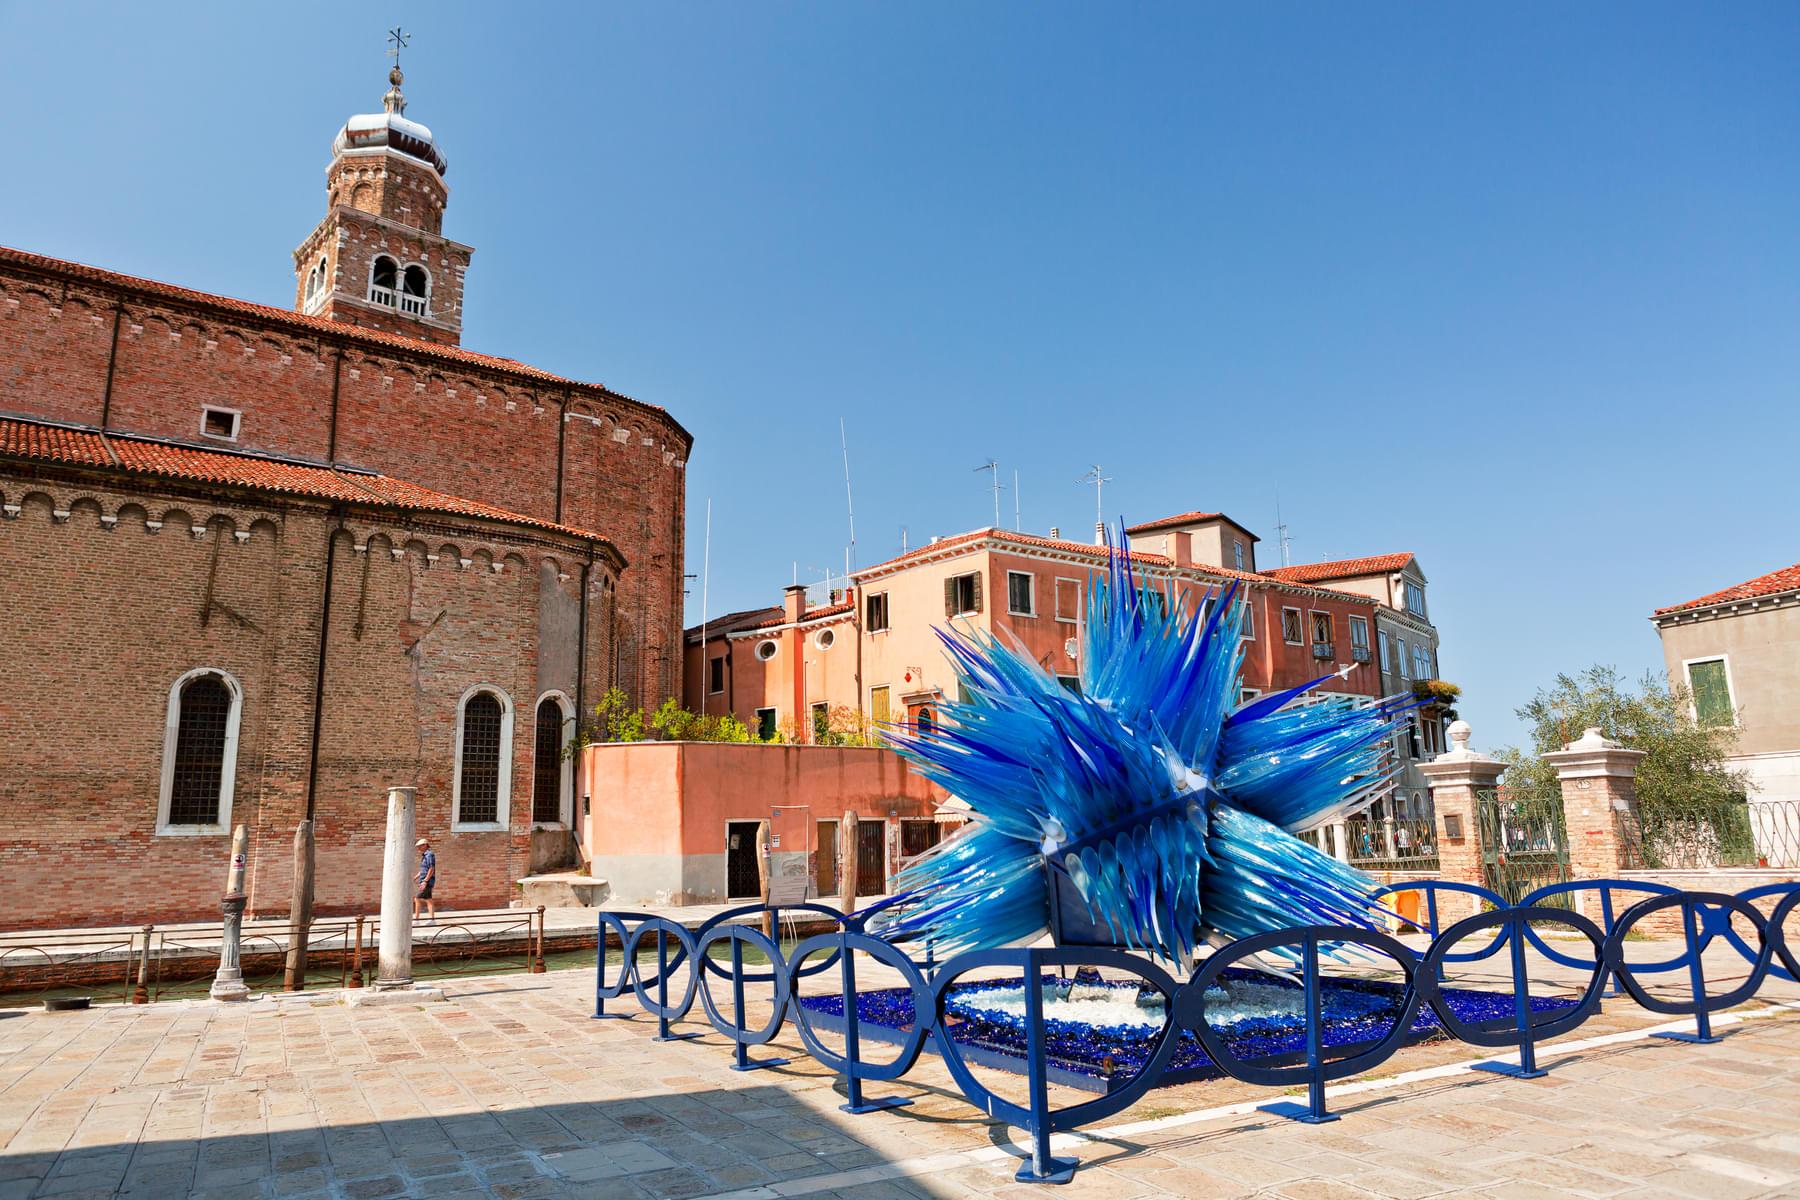 Get a chance to see Murano Glass Museum's astounding glass collections